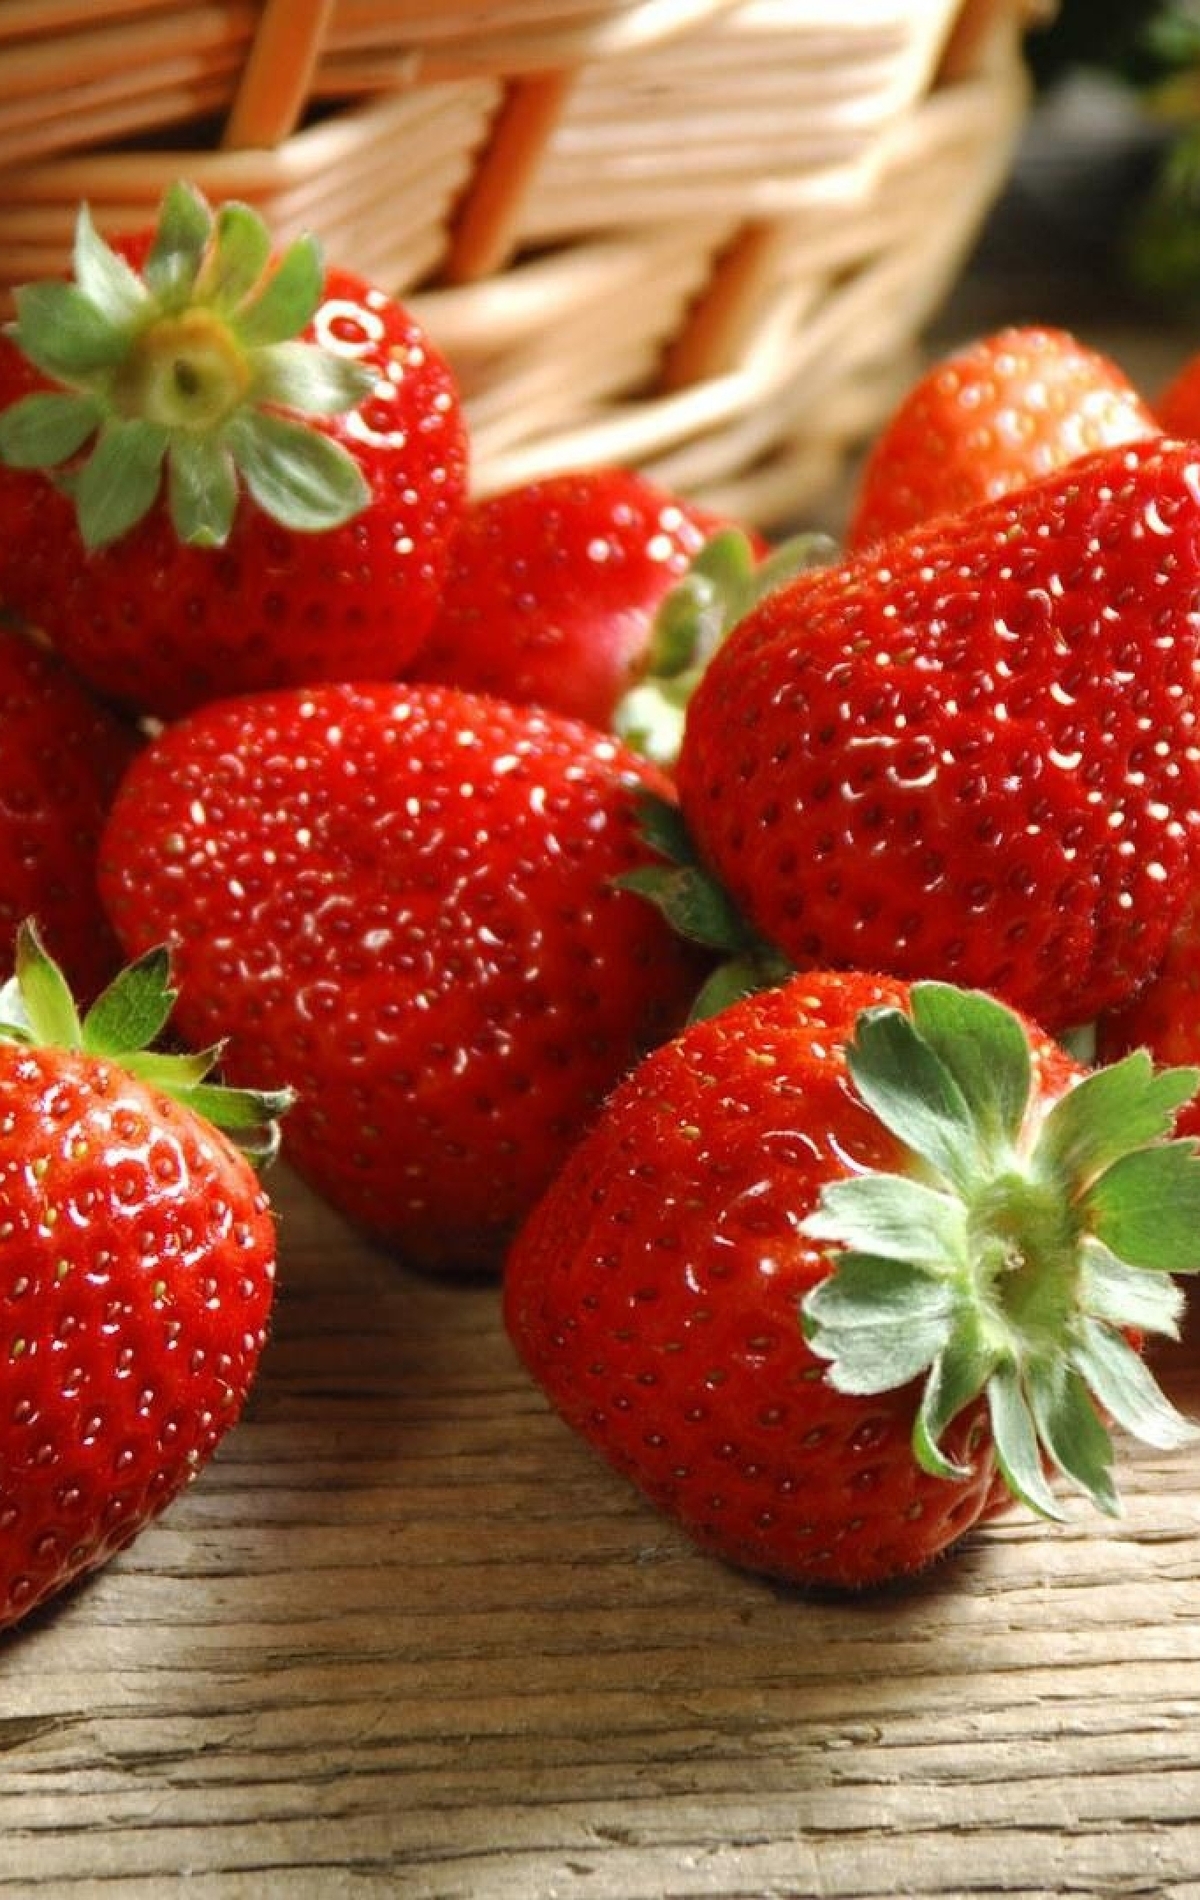 Image: Strawberry, berry, garden, red